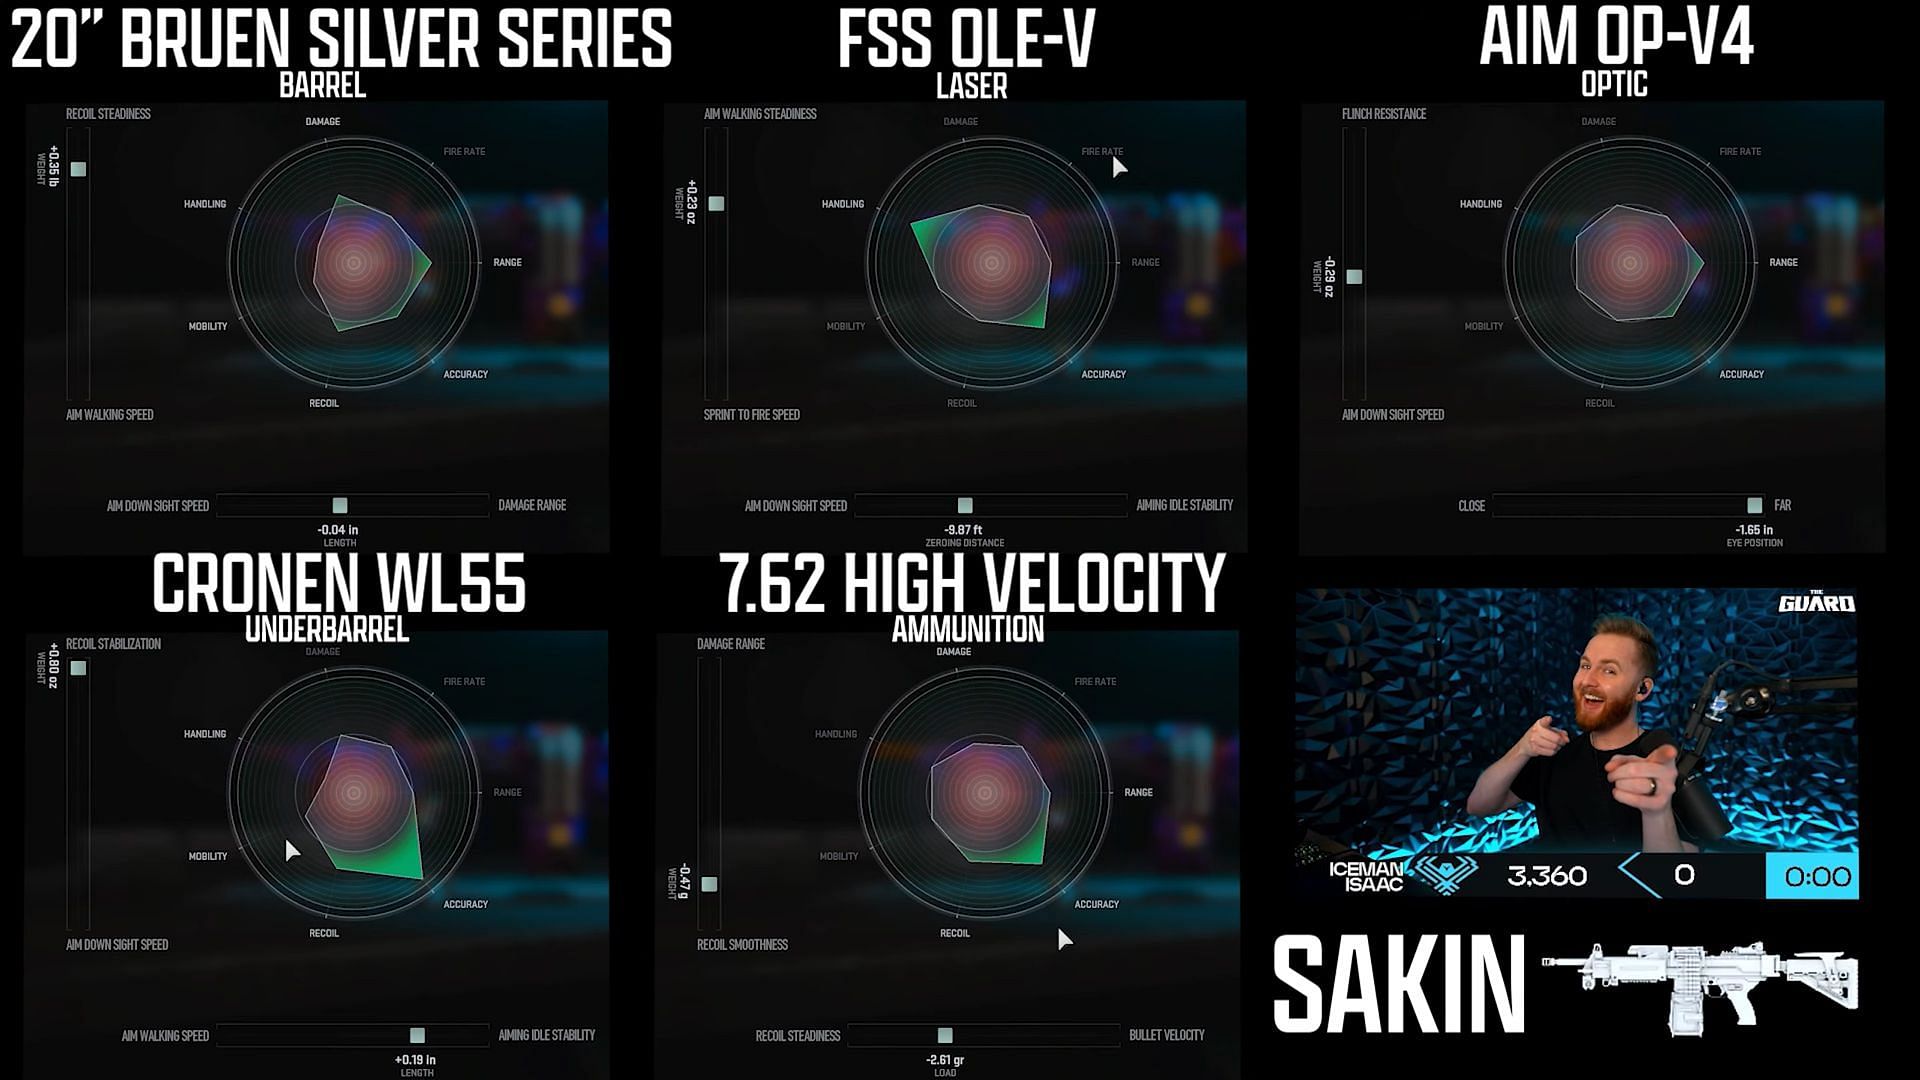 Tunings for the attachments of Sakin MG38 (Image via Activision and YouTube/IceManIssac)